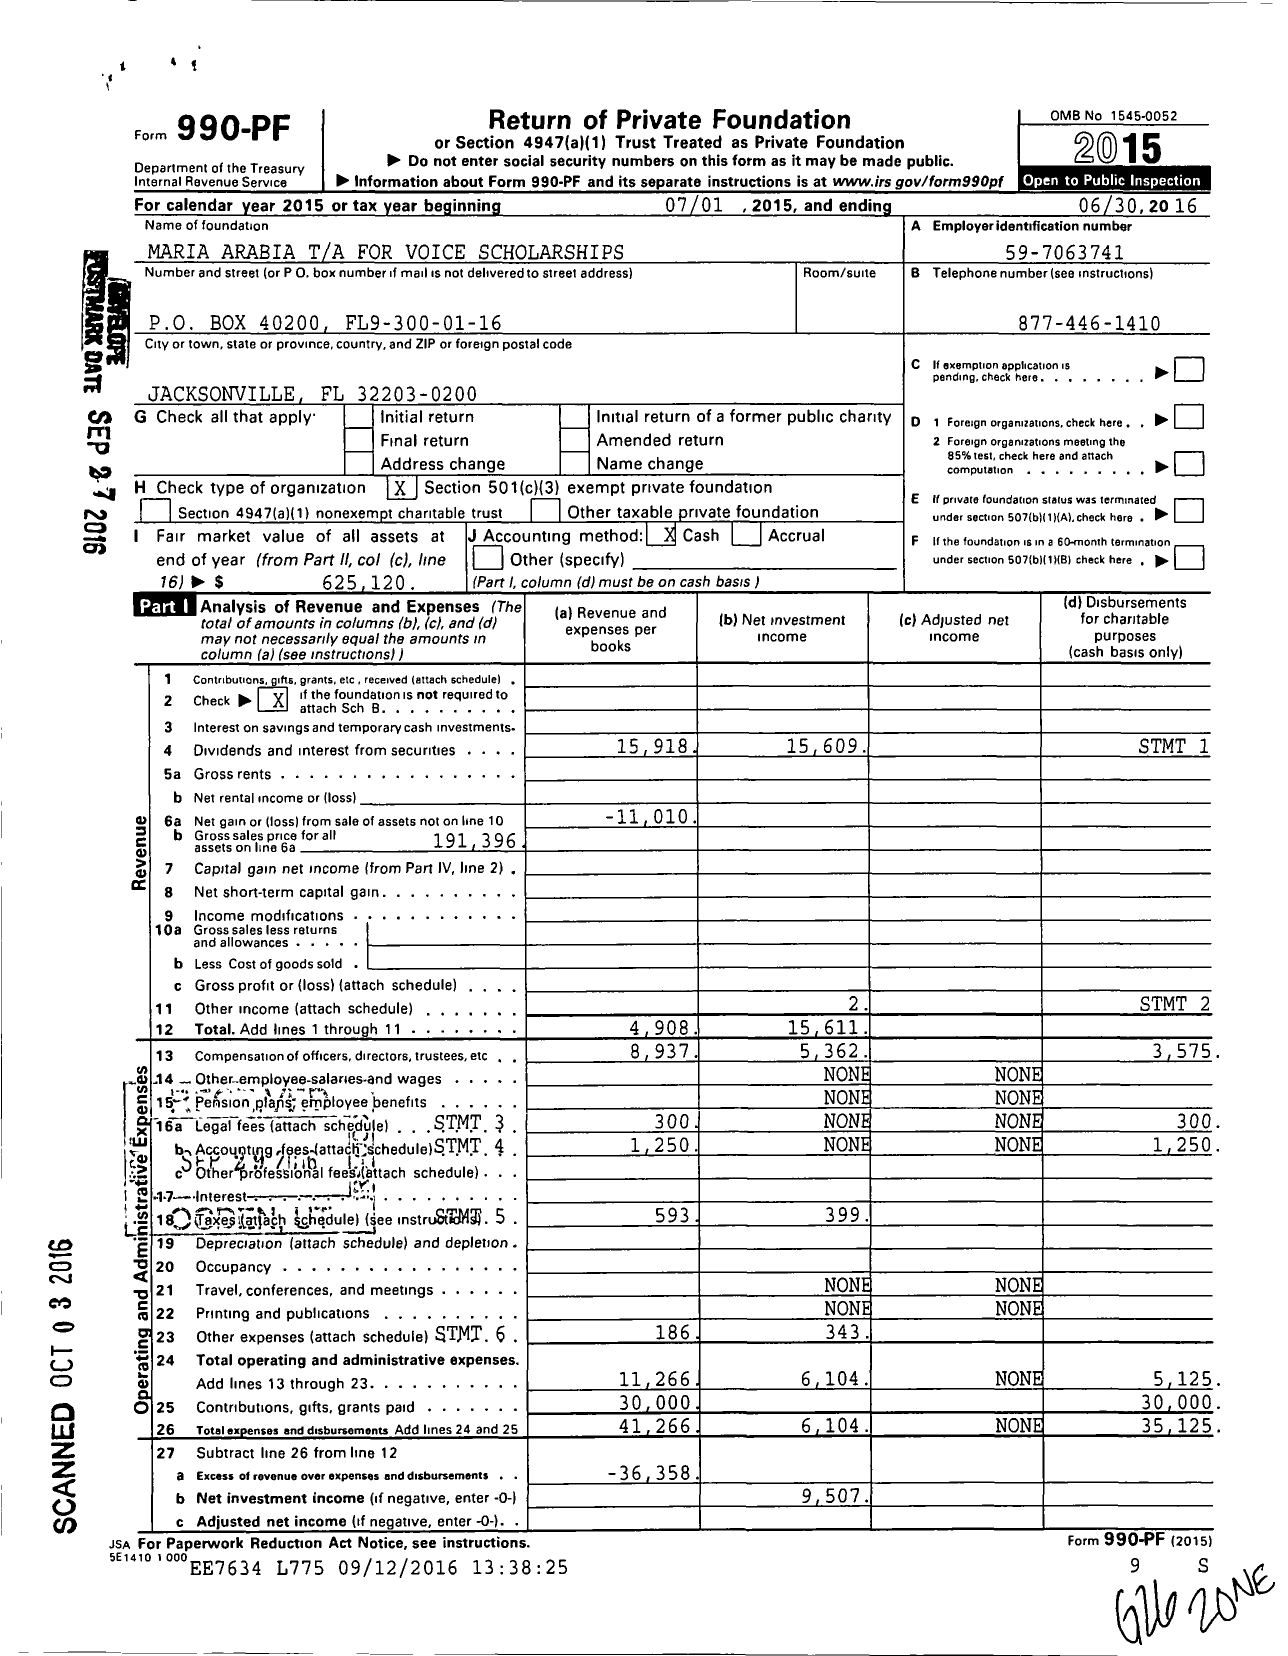 Image of first page of 2015 Form 990PF for Maria Arabia Ta for Voice Scholarships